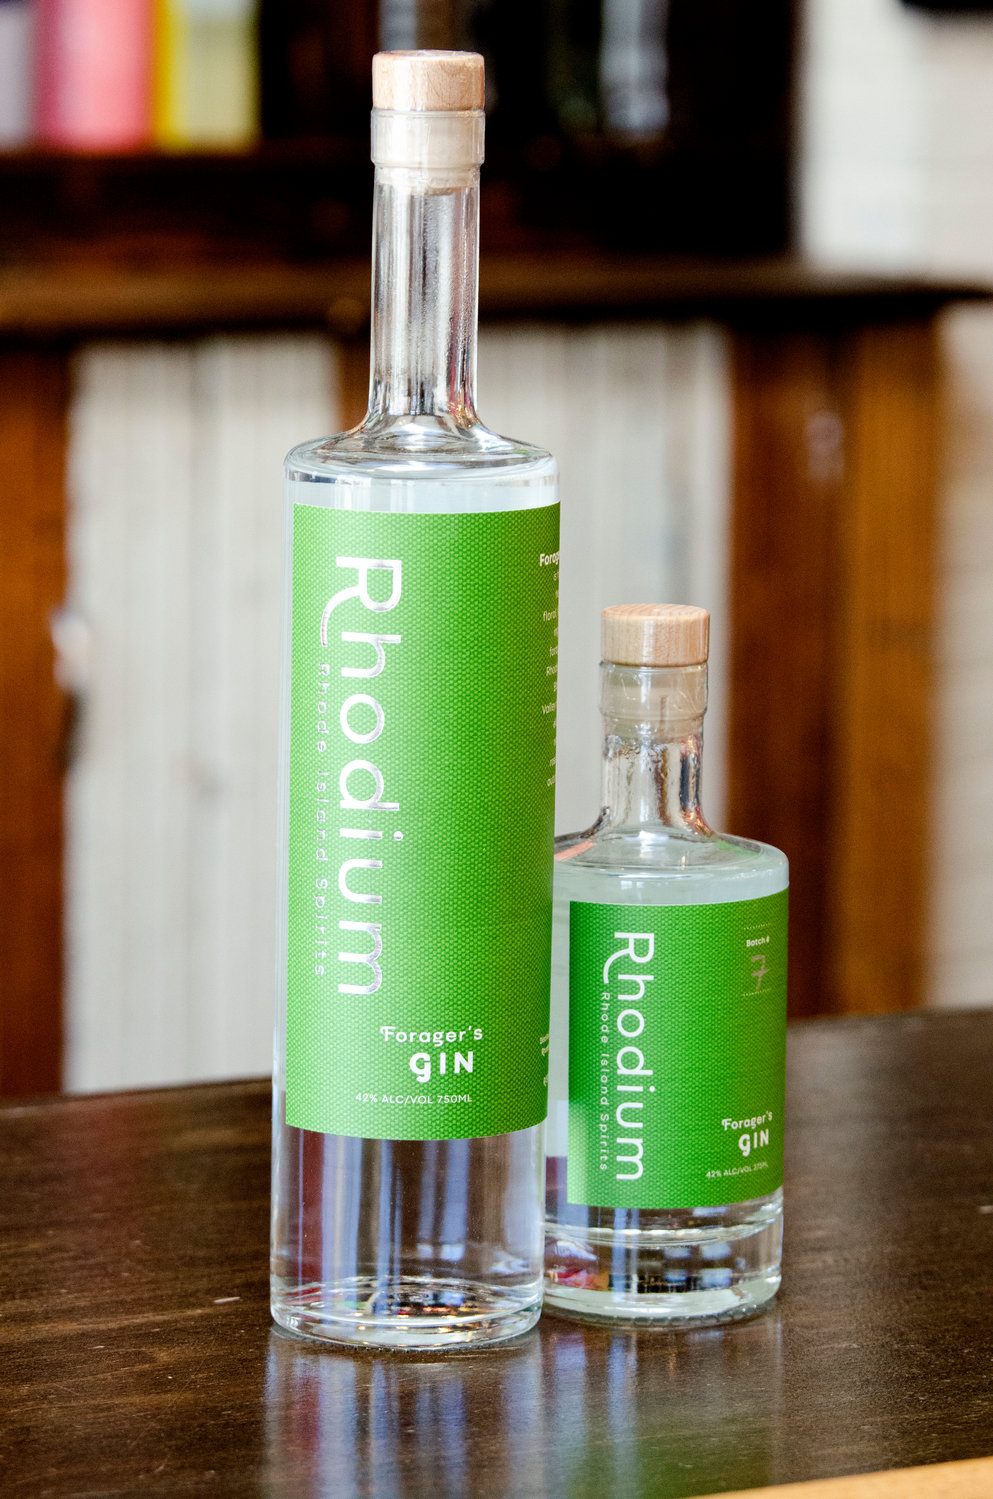 The Rhodium Forager’s Gin, which won a gold medal a few weeks ago, was the first spirit distilled by Rhode Island Spirits. Its name speaks to the recipe, which relies on ingredients wild foraged from the natural world, blended with ingredients sourced from local farms.